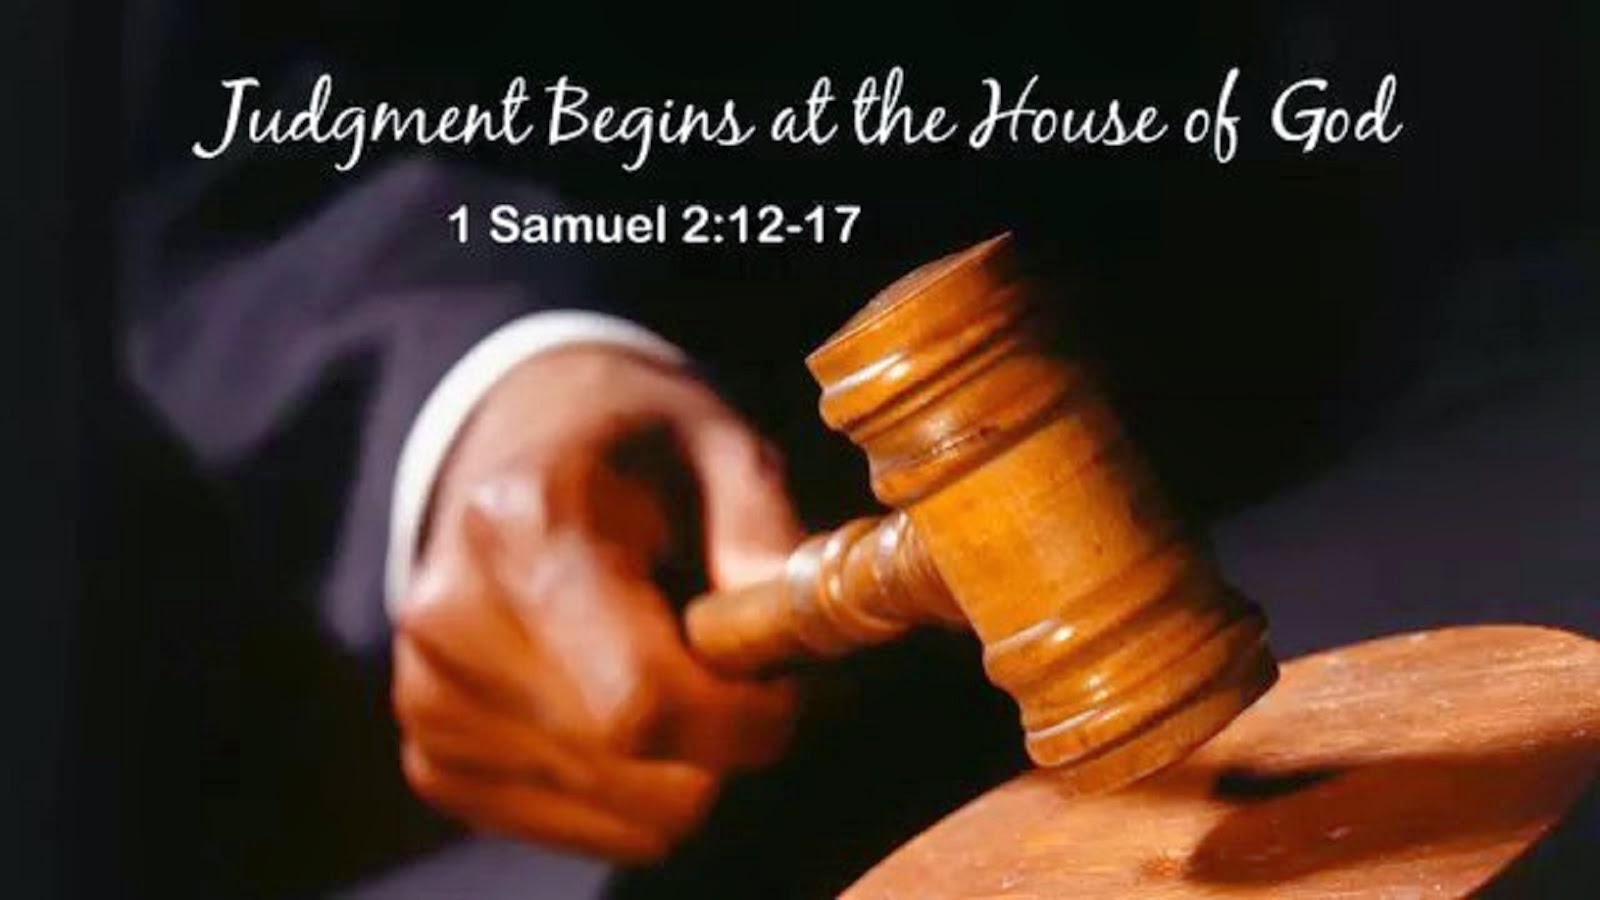 JUDGEMENT STARTS AT THE HOUSE OF GOD